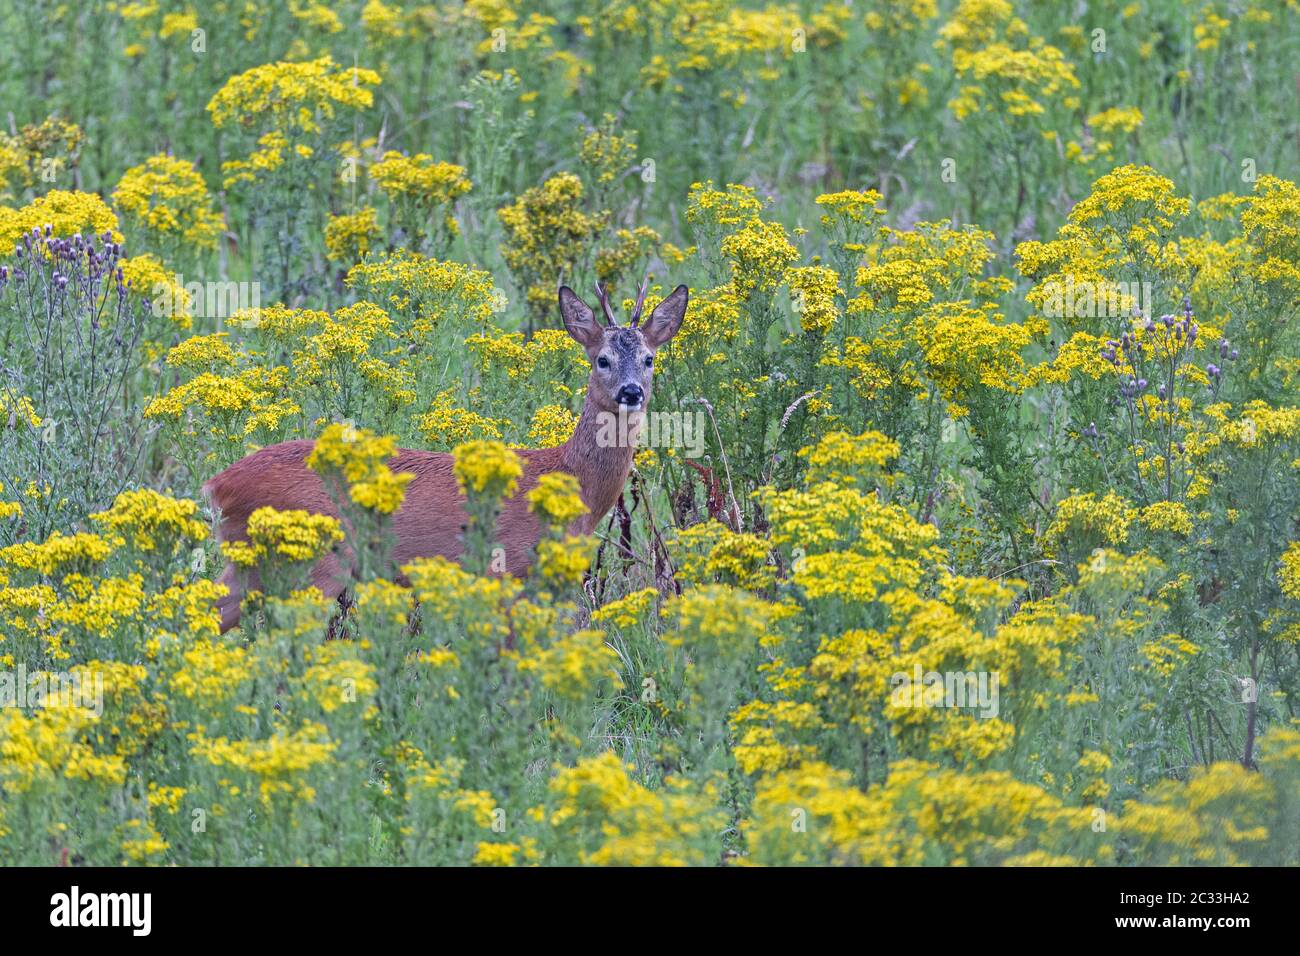 The territory of this Roebuck lies in a meadow with large populations of the Hoary Ragwort Stock Photo